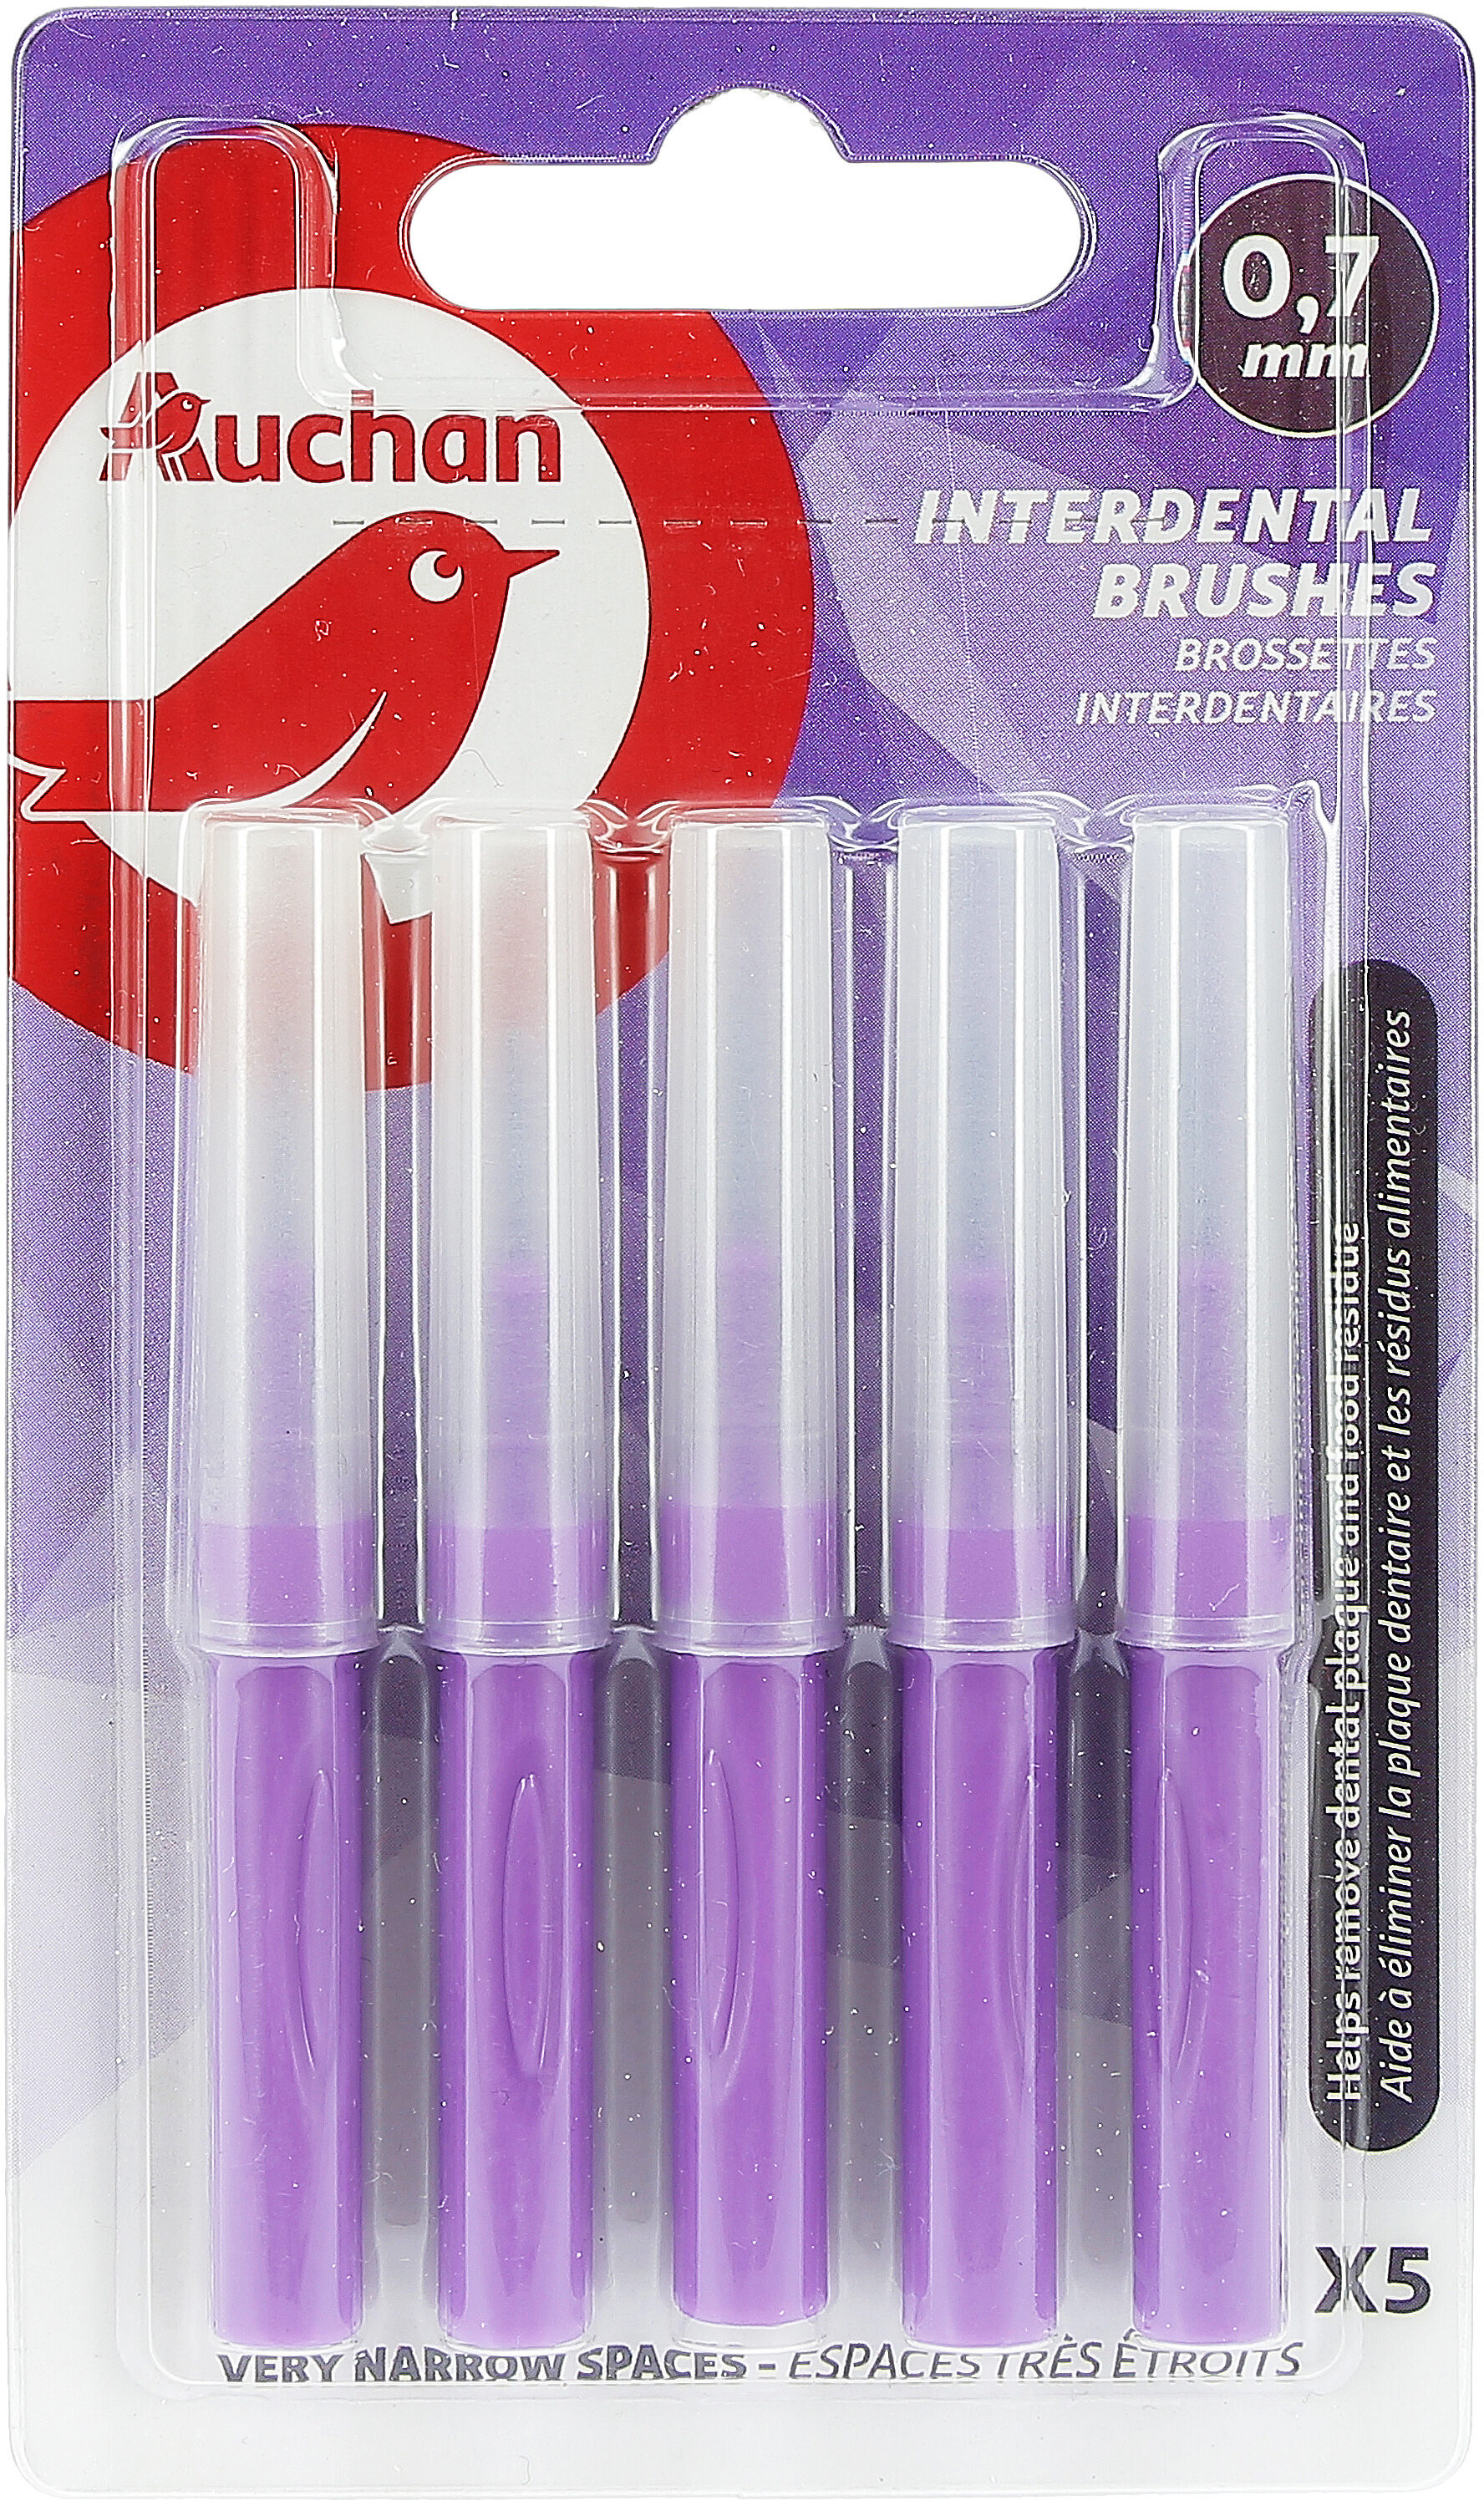 Brossettes interdentaires - 0.7 MM - Product - fr